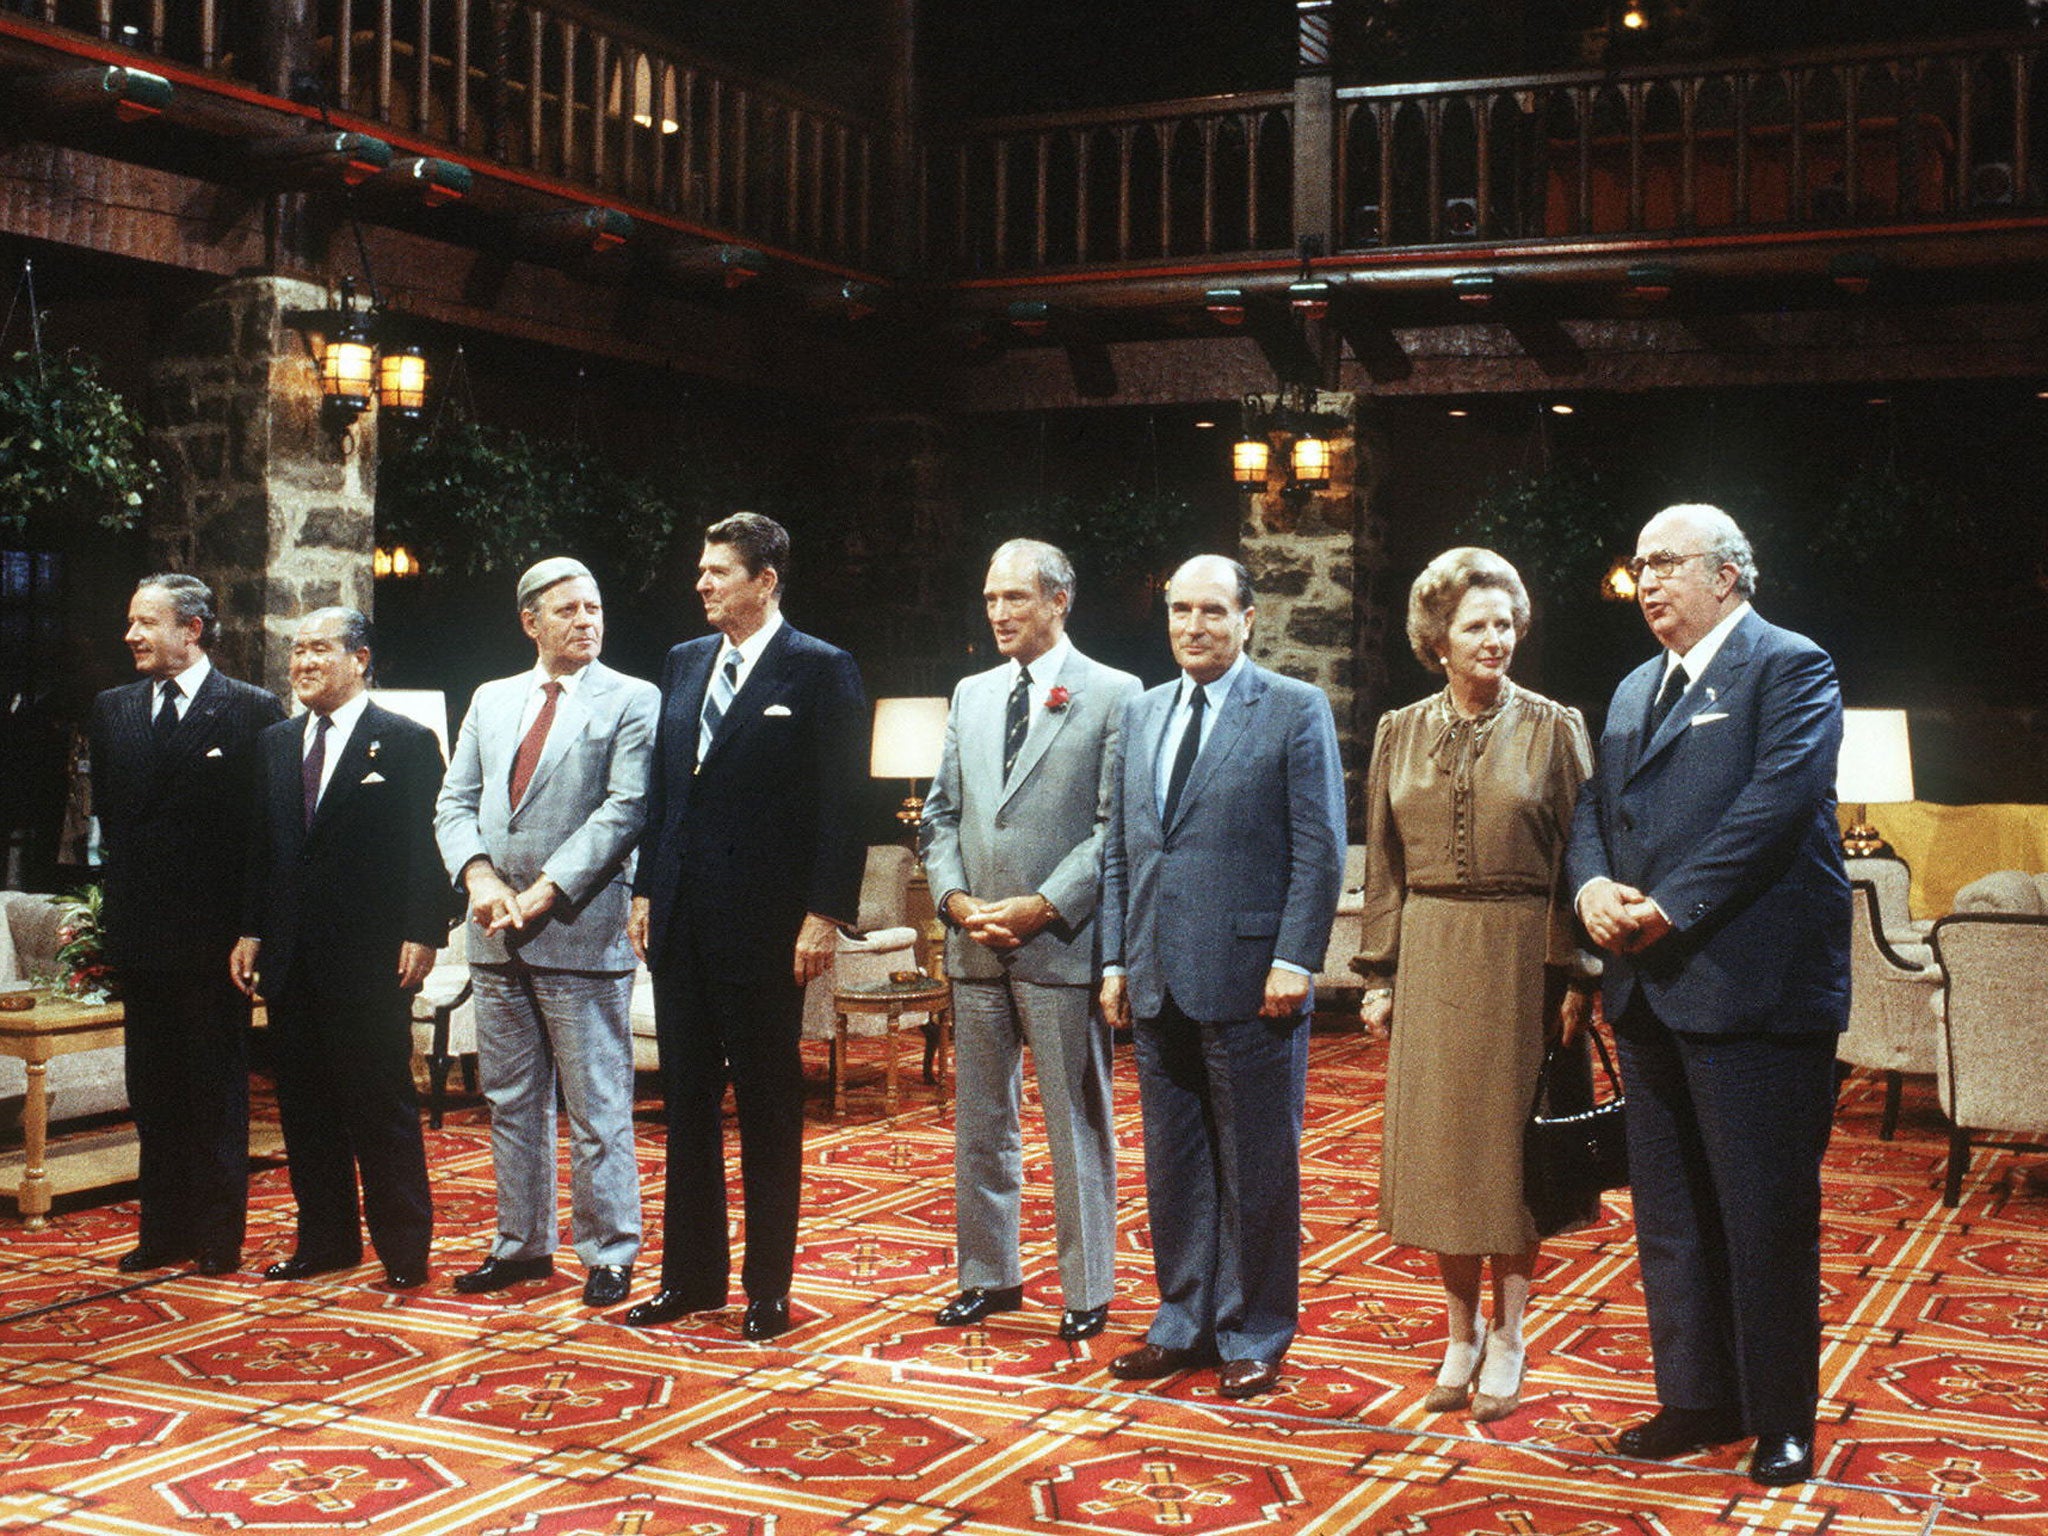 U.S. President Ronald Reagan (c) surrounded by (l-r) President of the European Union commission Gaston Thorn, Japanese Premier Zenko Suzuki, German Chancellor Helmut Schmidt, Canadian Prime Minister Pierre Elliott Trudeau, French President Frantois Mitterrand, British Premier Margareth Thatcher and Italian Prime Minister Giovanni Spadolini during the Summit of the leading industrial countries, in Ottawa, 18 July 1981.